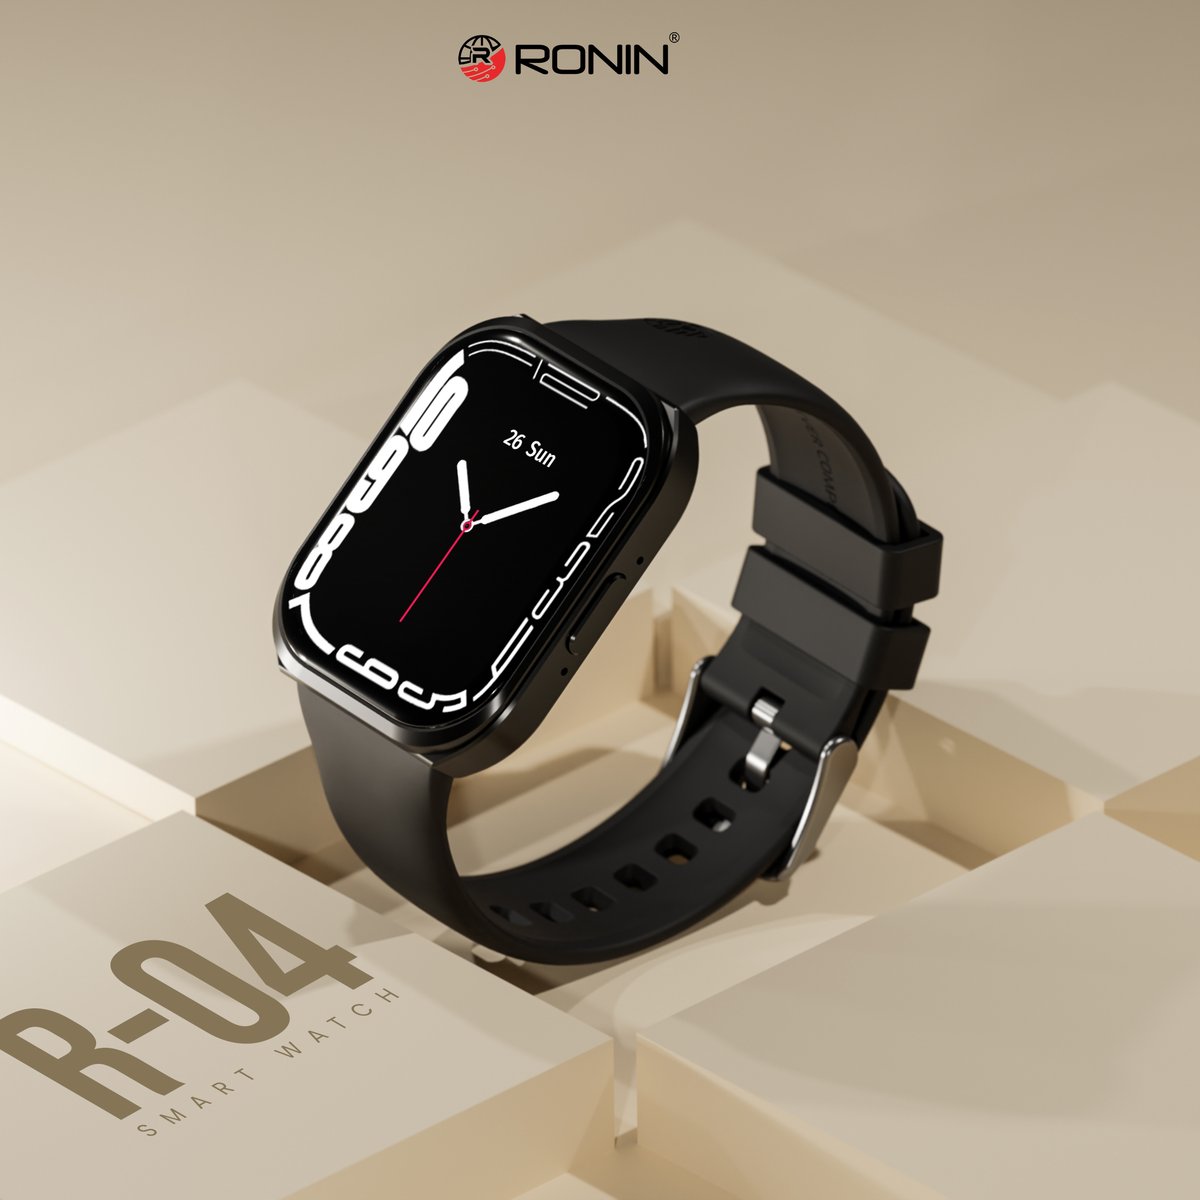 Enter a new era of connectivity and convenience with Ronin R-04 Smart Watch.

Shop Now: ronin.pk/products/r-04-…

#Qualitynevercompromise #roninpakistan #accessories #techlovers #quality #ronin #watches #newtechnology #smartness